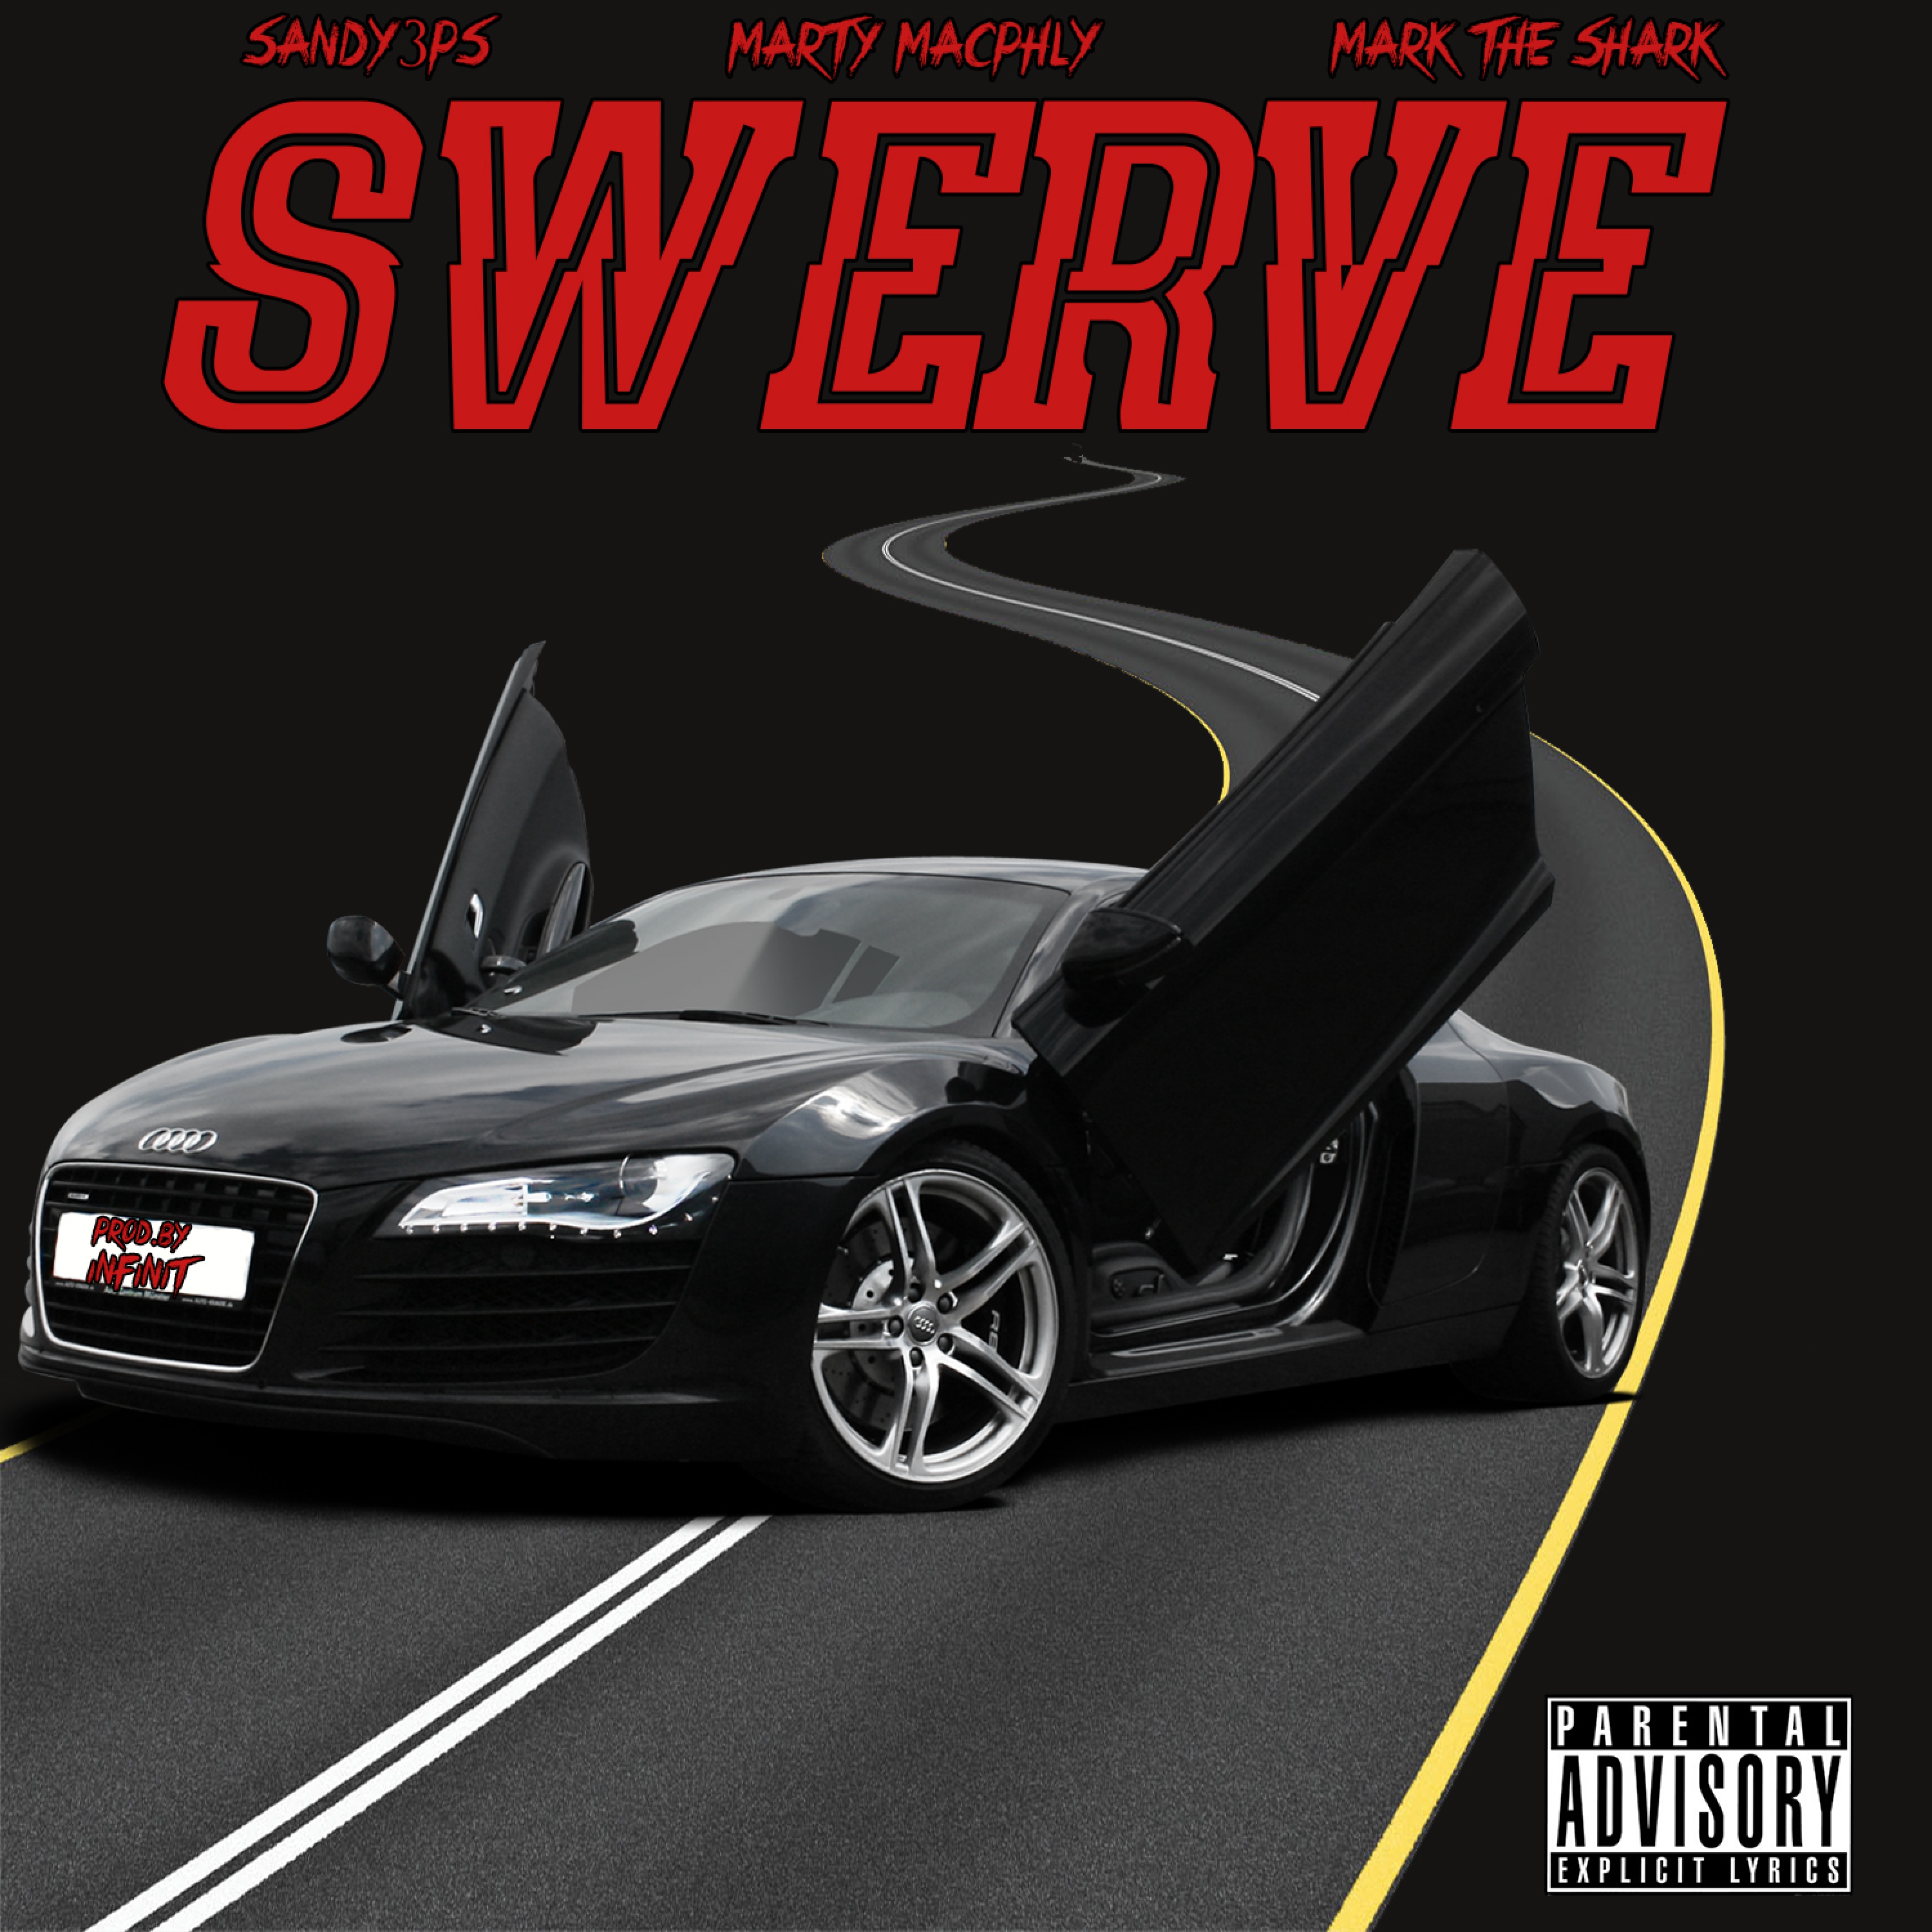 Swerve (feat. Marty Macphly & Mark the Shark)